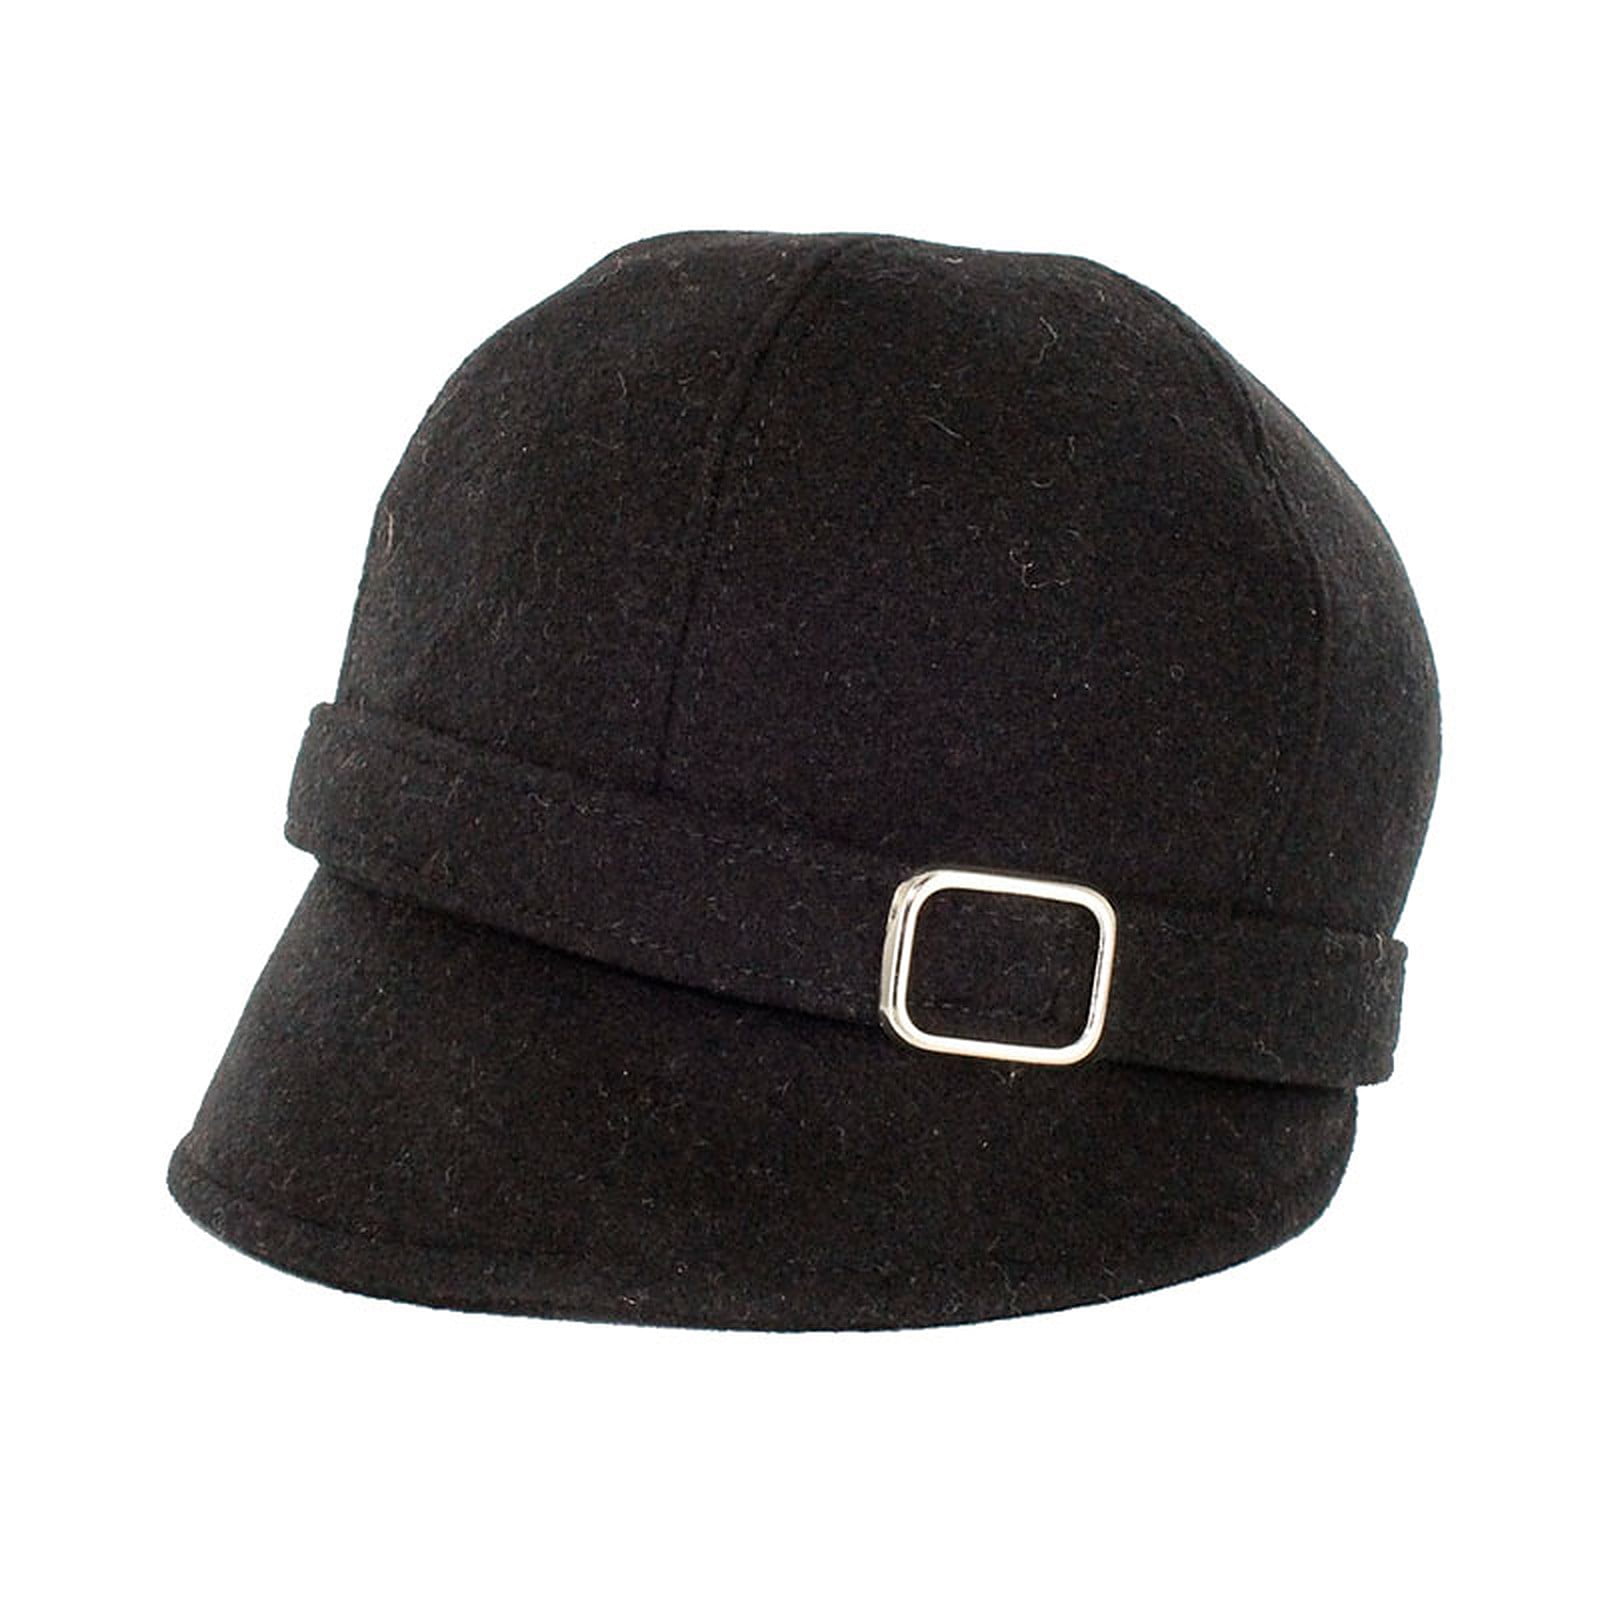 Women's Irish Bucket Hat with Tweed Accents - Black - Large - The Vermont Country Store